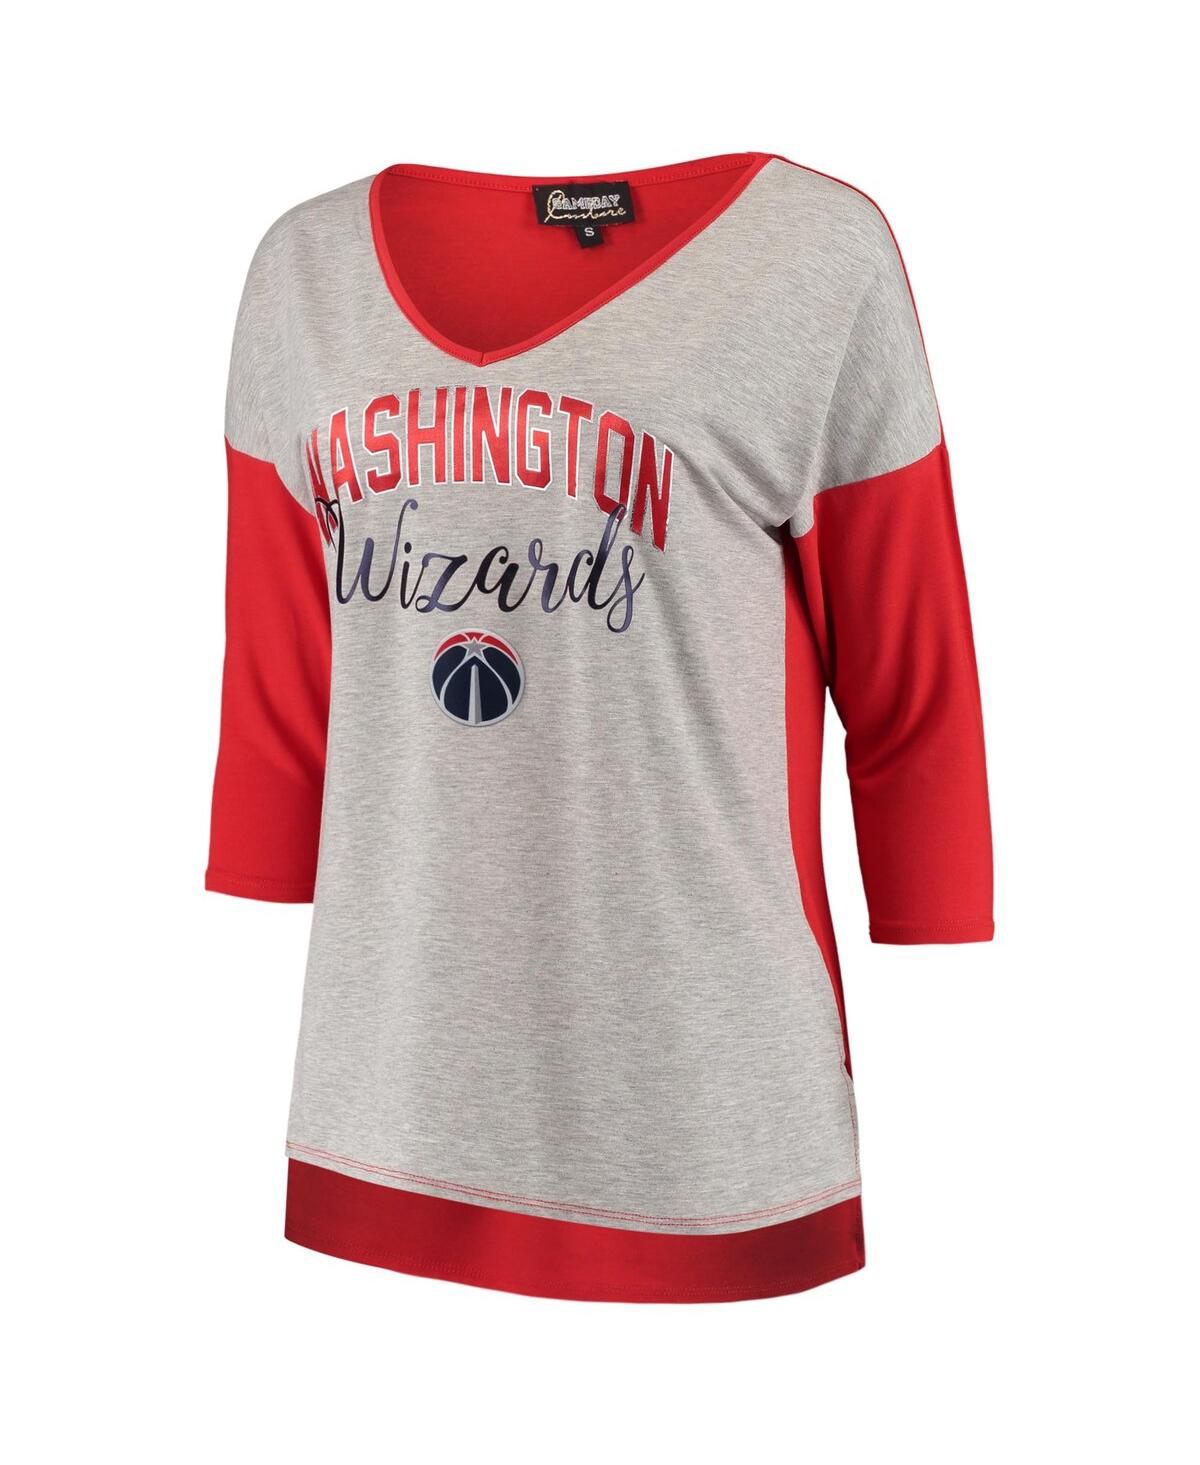 Shop Gameday Couture Women's Heathered Gray Washington Wizards In It To Win It V-neck 3/4-sleeve T-shirt